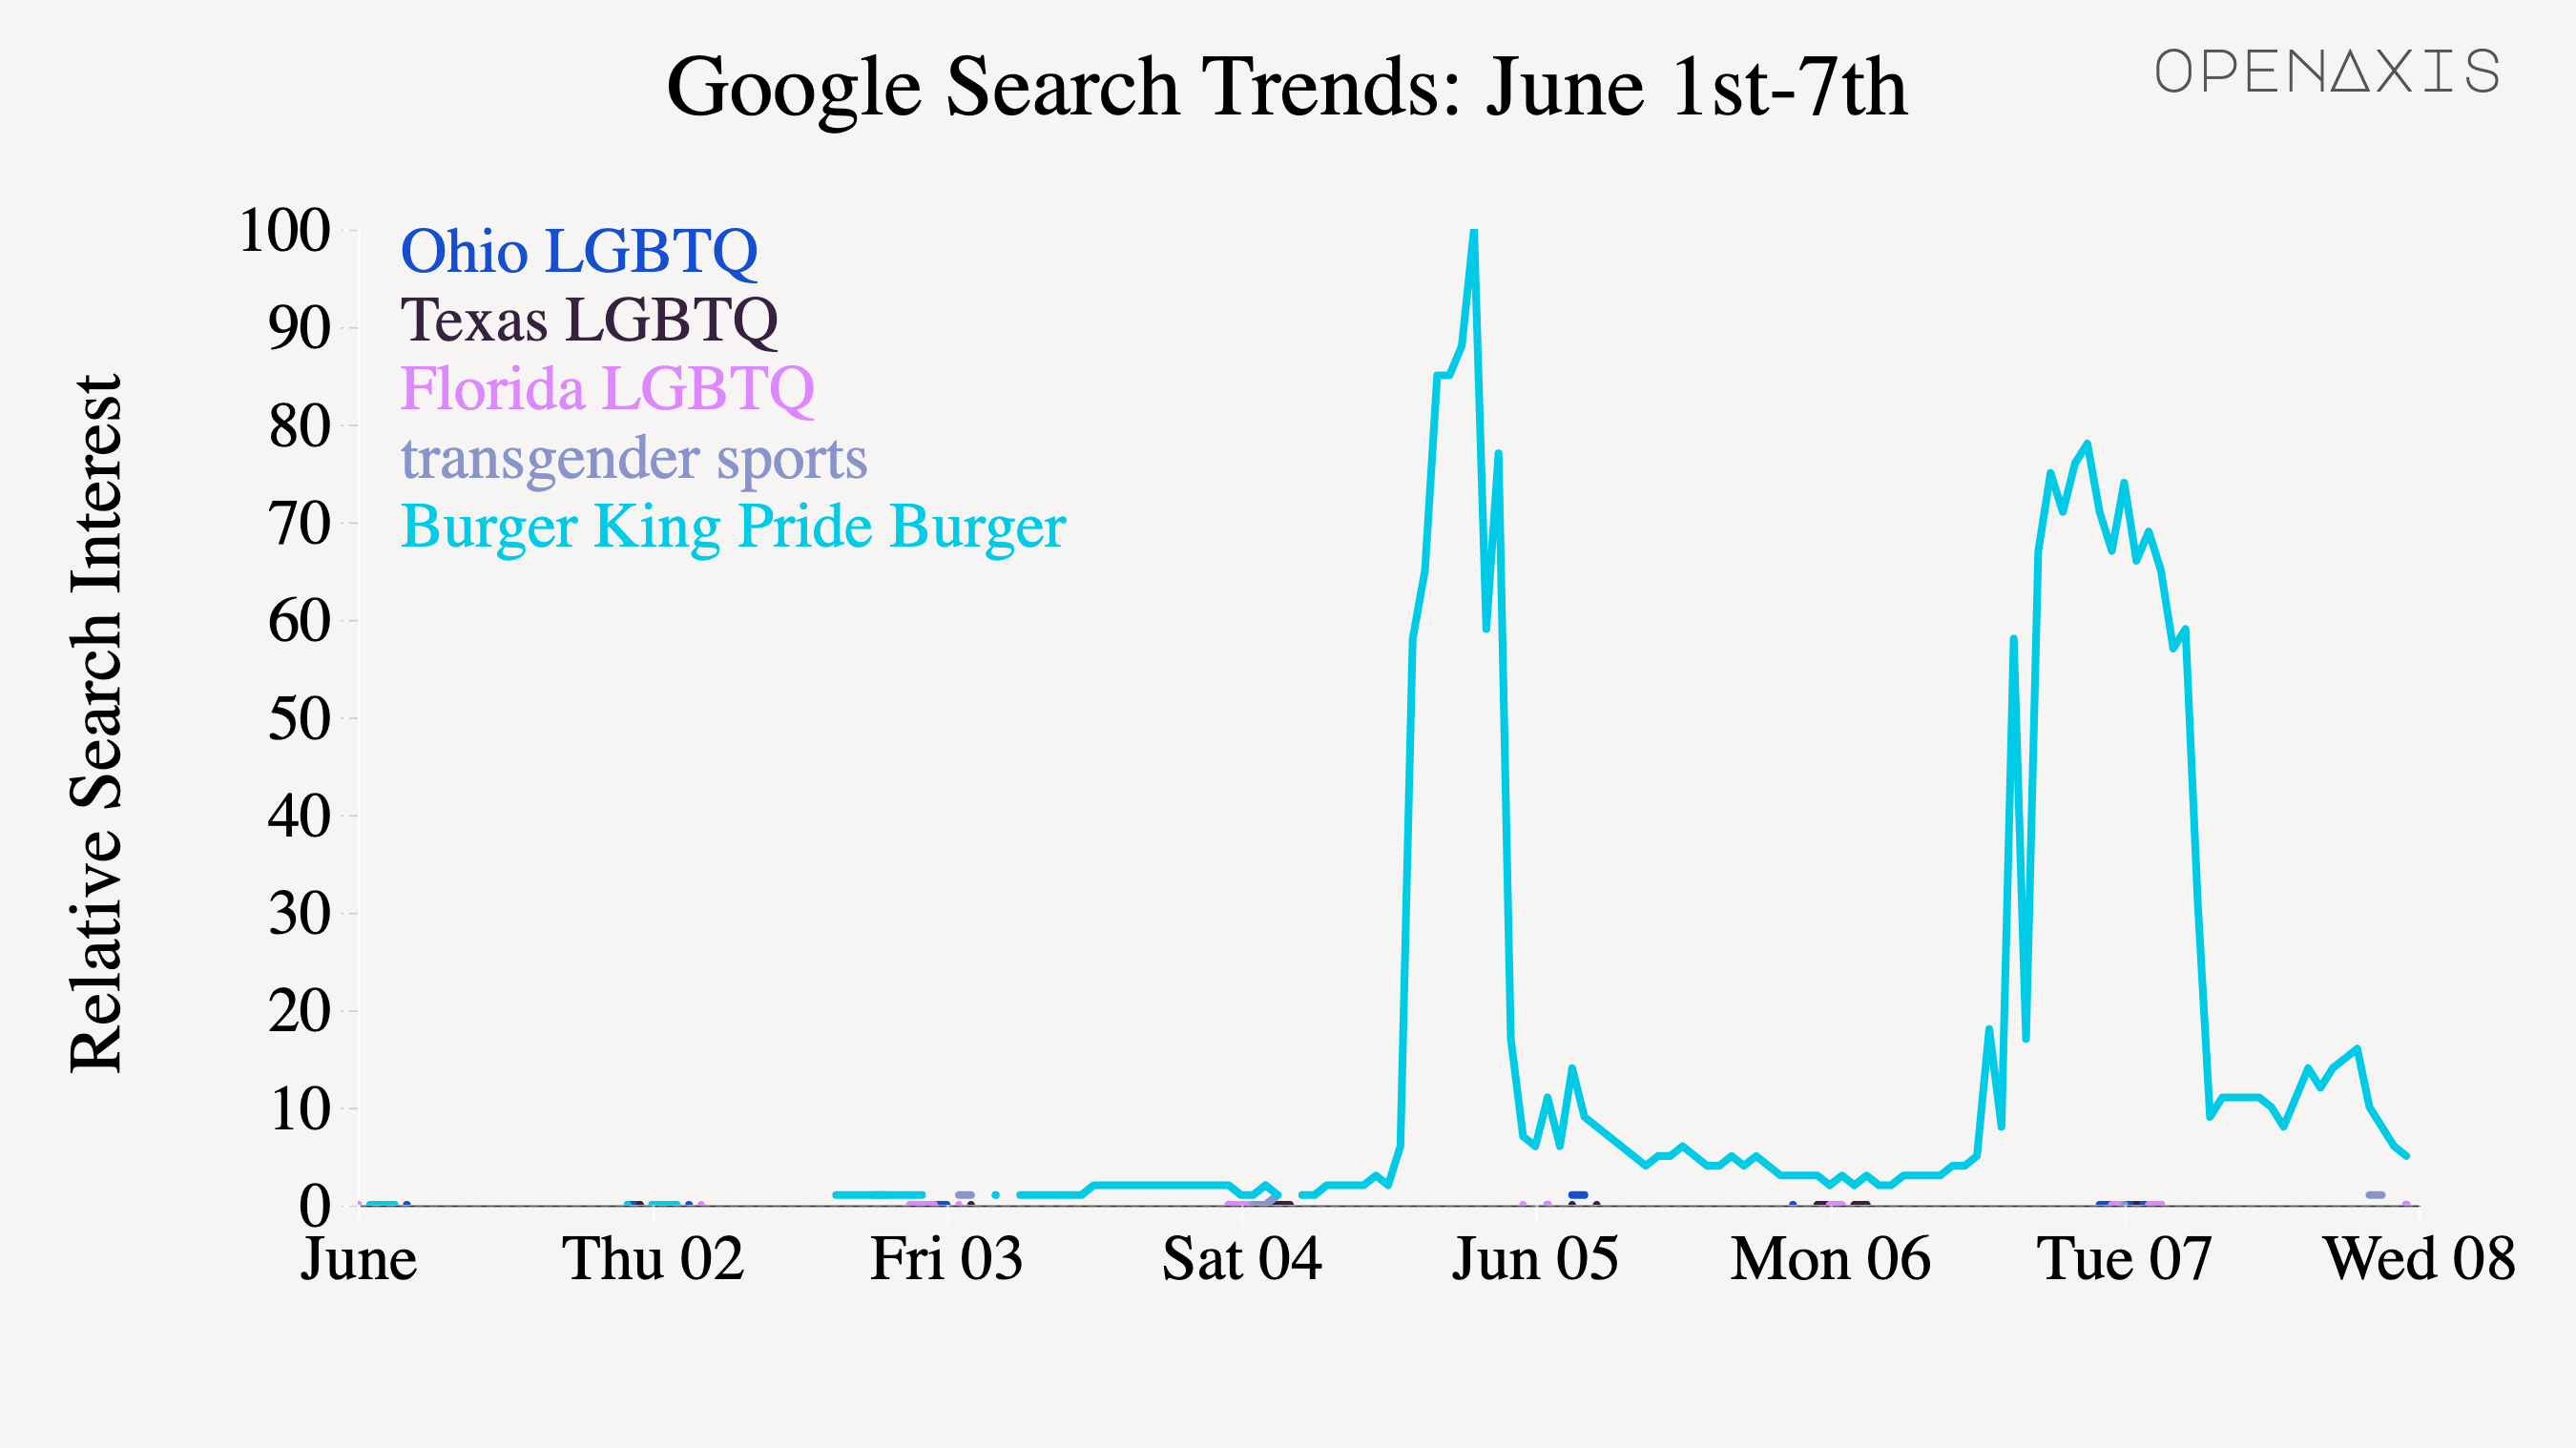 "Google Search Trends: June 1st-7th"